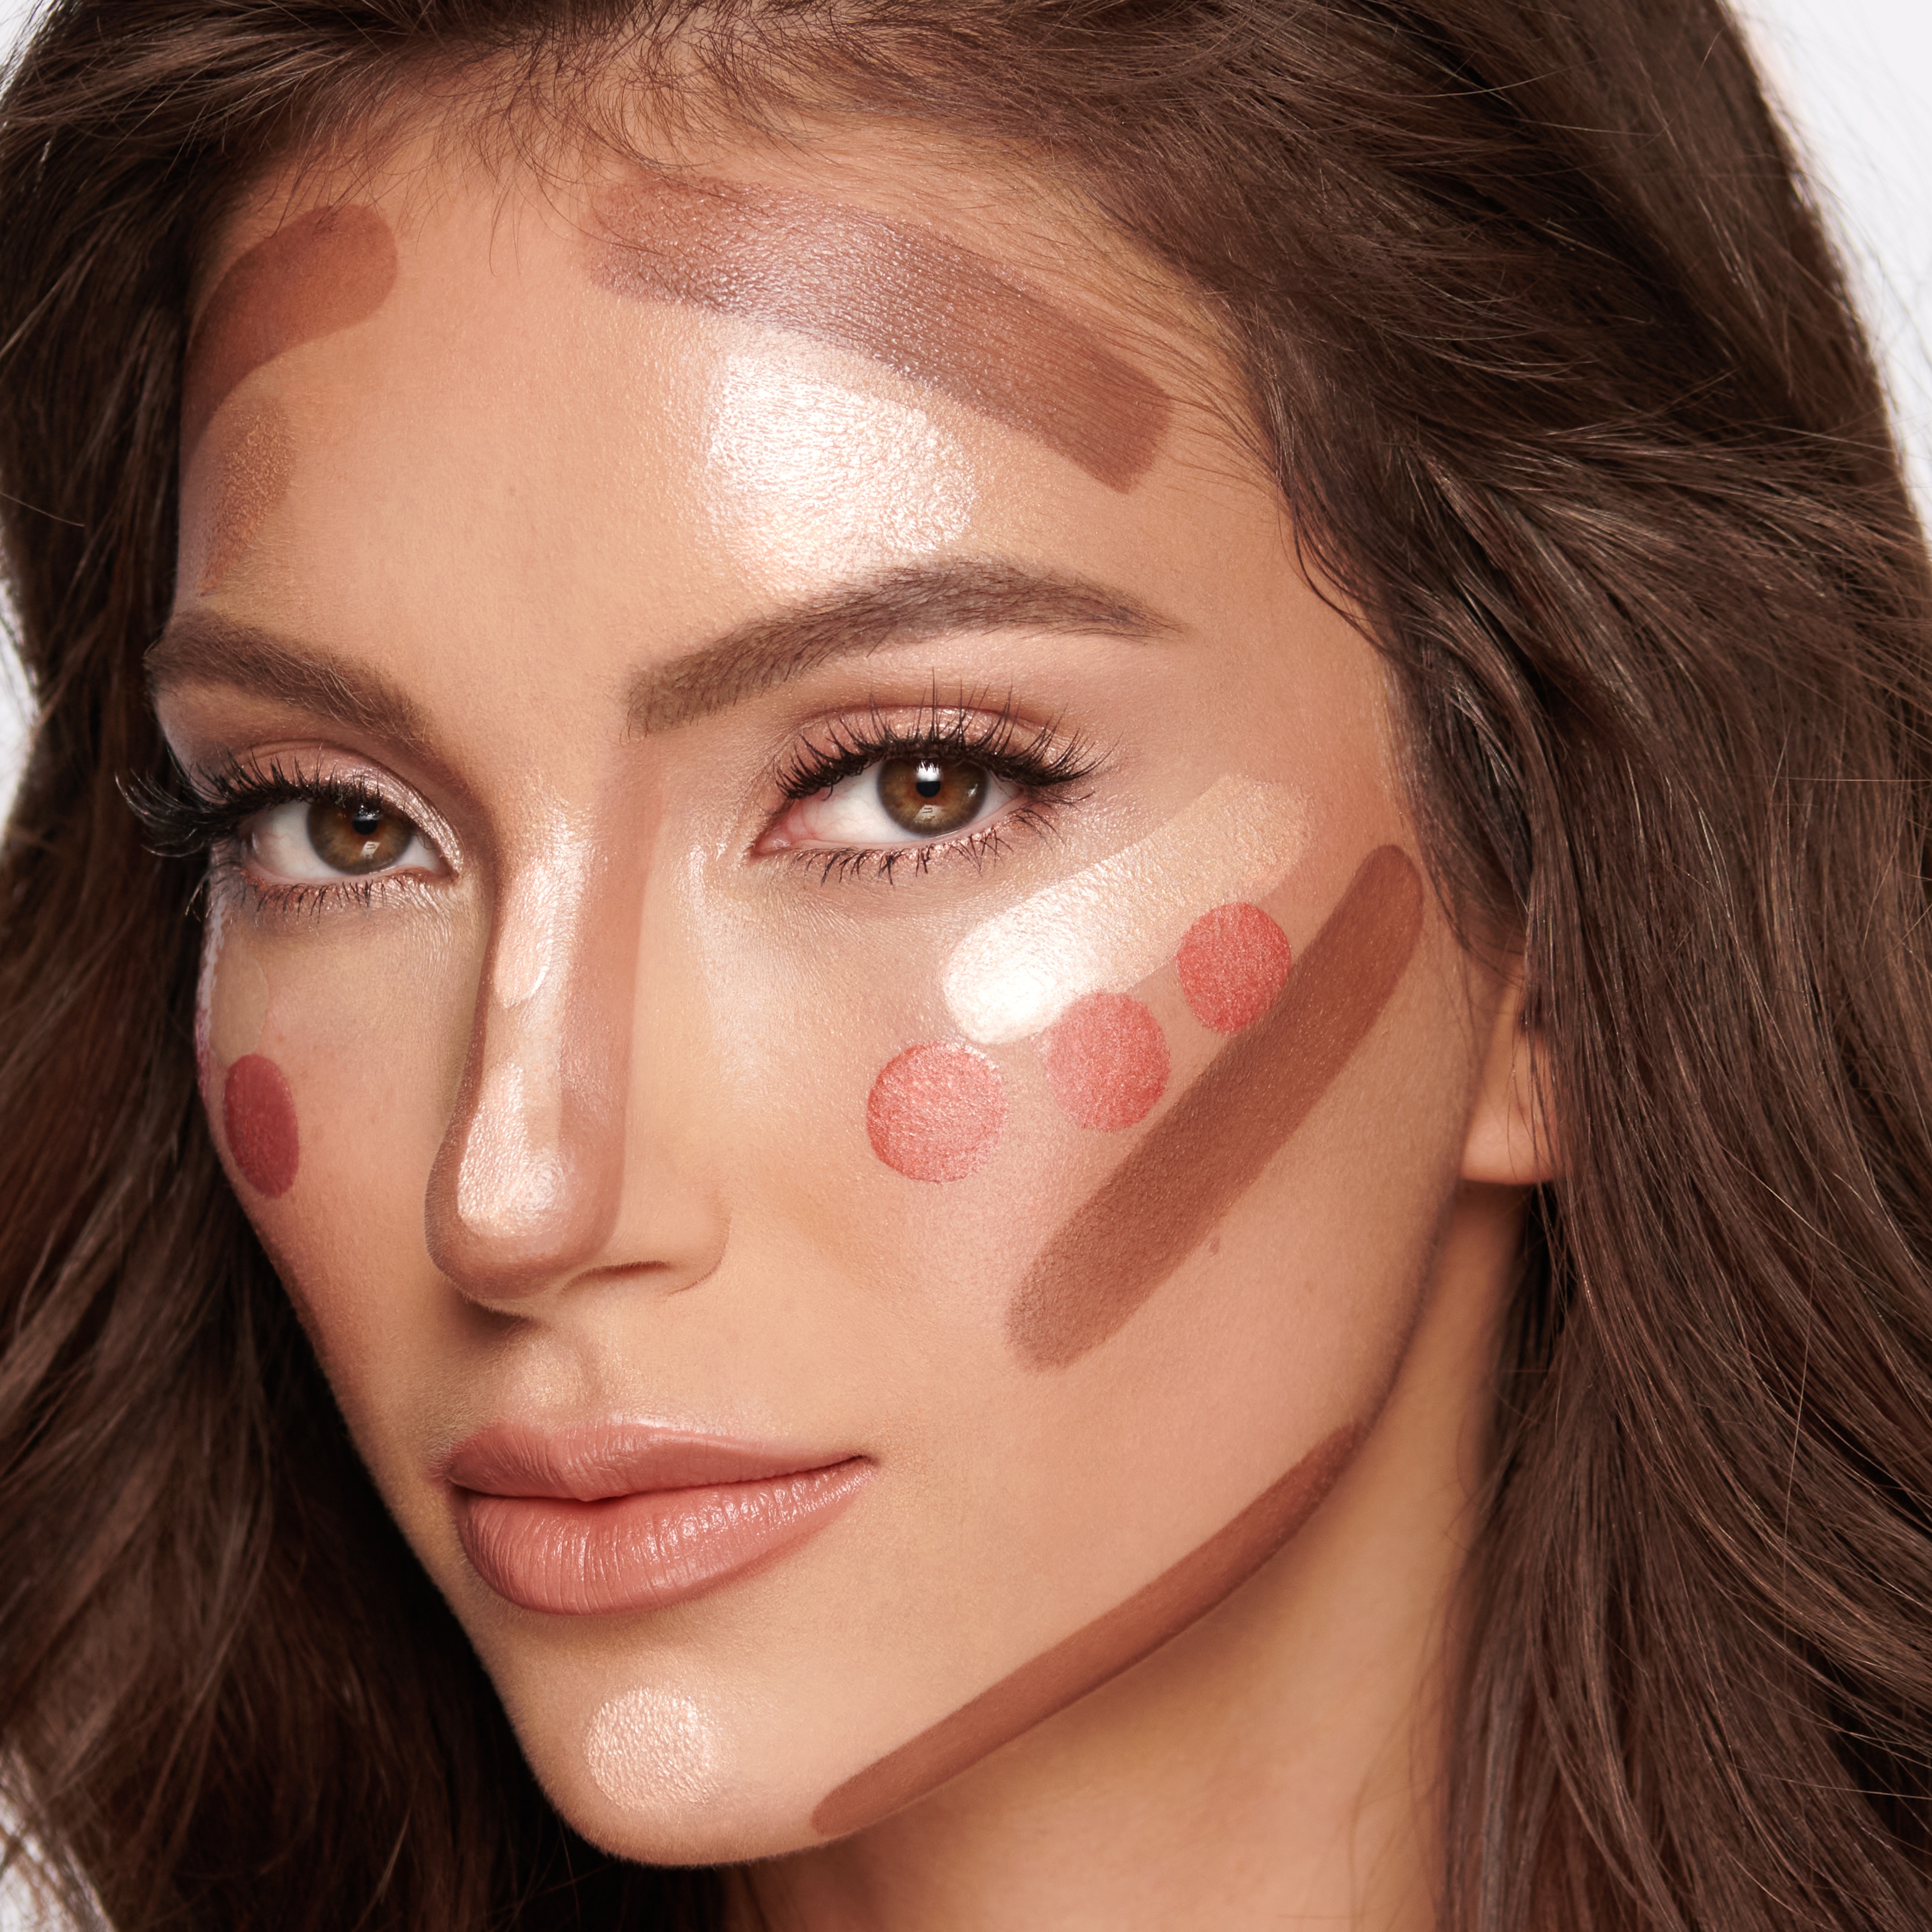 How to Contour and What is Contouring?